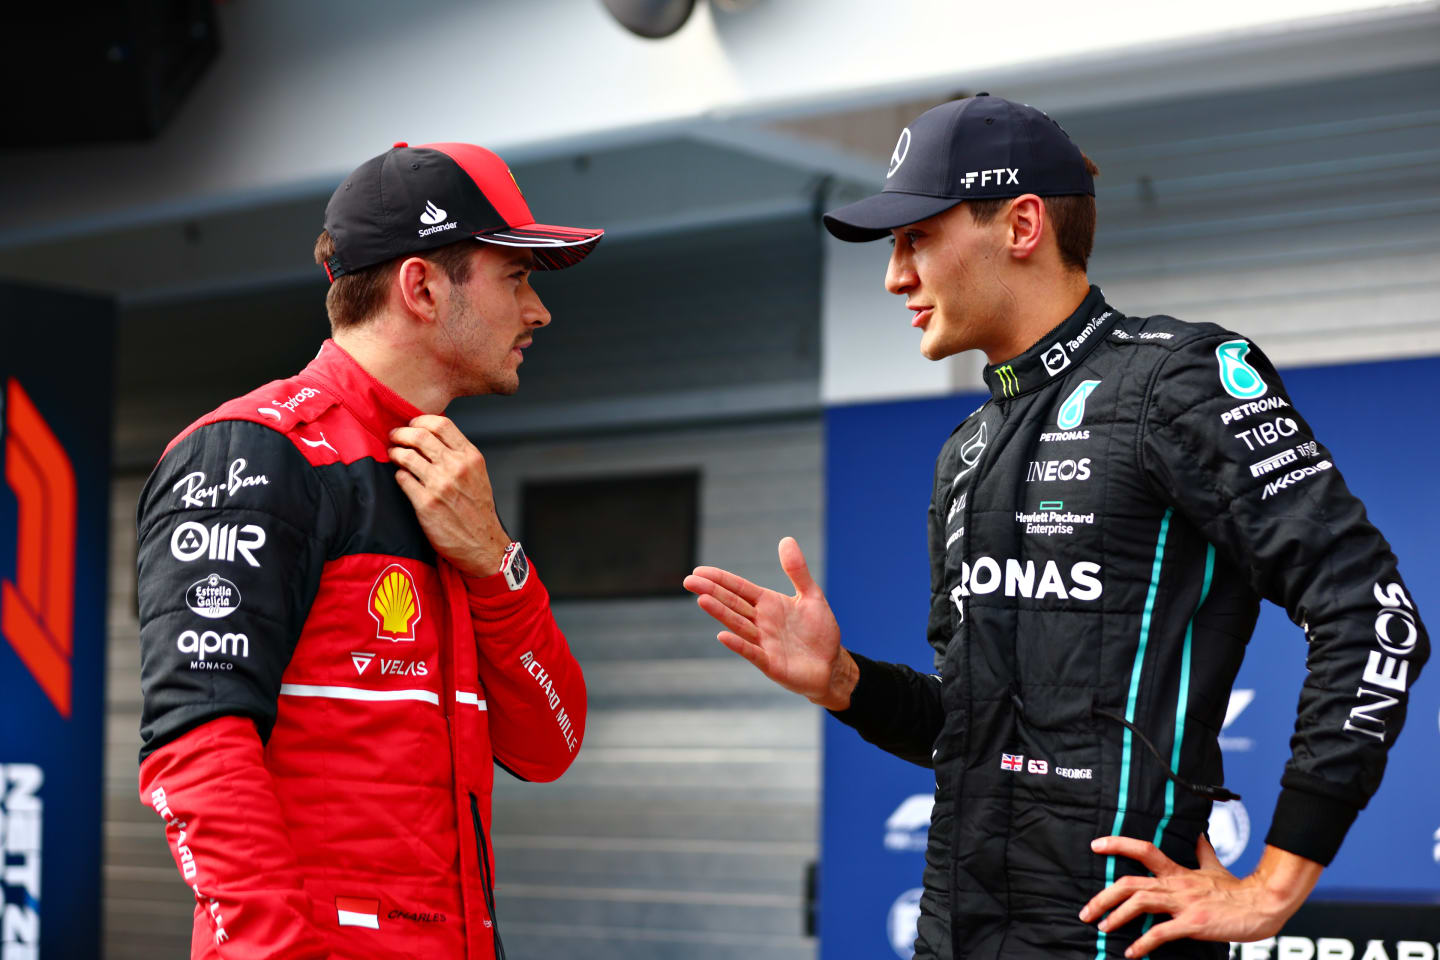 BUDAPEST, HUNGARY - JULY 30: Pole position qualifier George Russell of Great Britain and Mercedes talks with Third placed qualifier Charles Leclerc of Monaco and Ferrari in parc ferme during qualifying ahead of the F1 Grand Prix of Hungary at Hungaroring on July 30, 2022 in Budapest, Hungary. (Photo by Dan Istitene - Formula 1/Formula 1 via Getty Images)